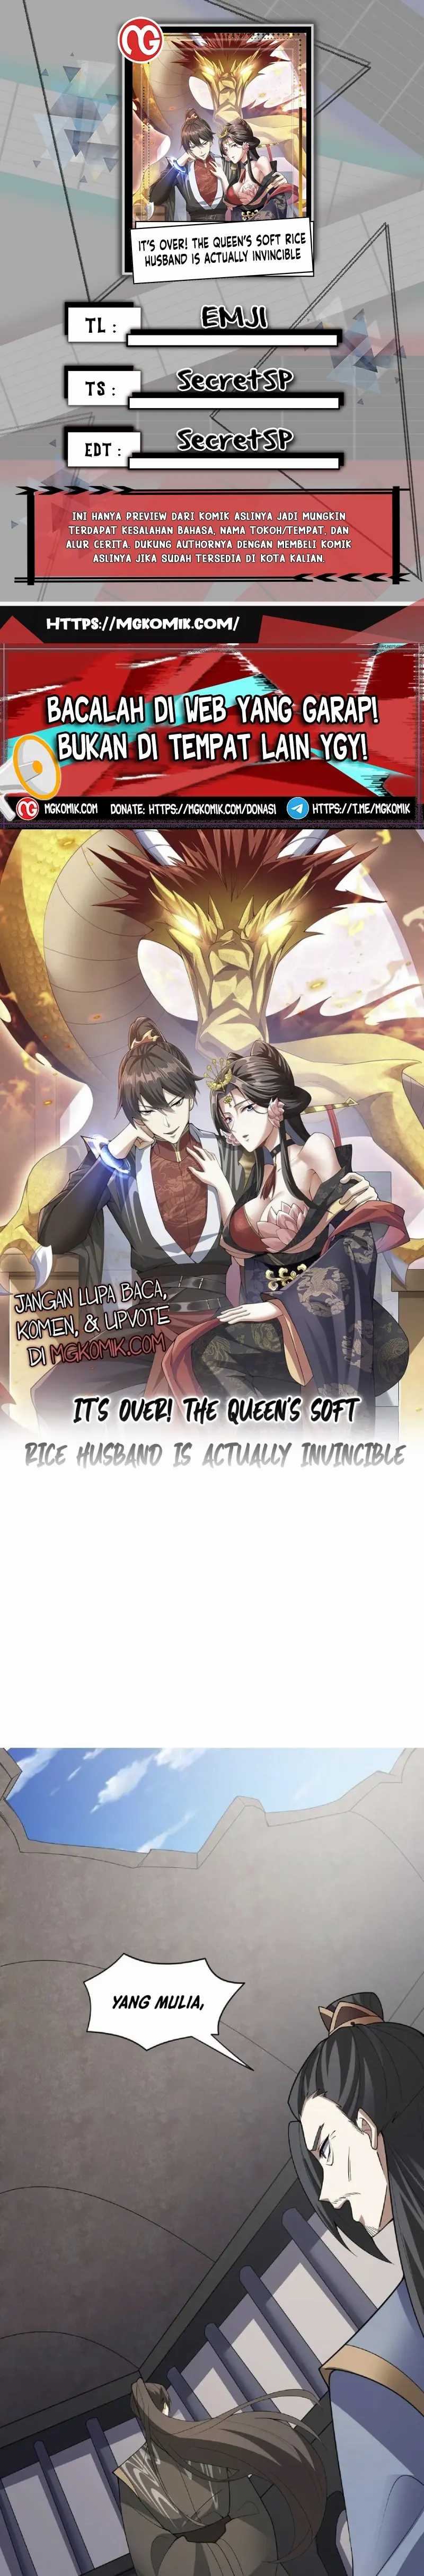 It'S Over! The Queen'S Soft Rice Husband Is Actually Invincible Chapter 57 - 61